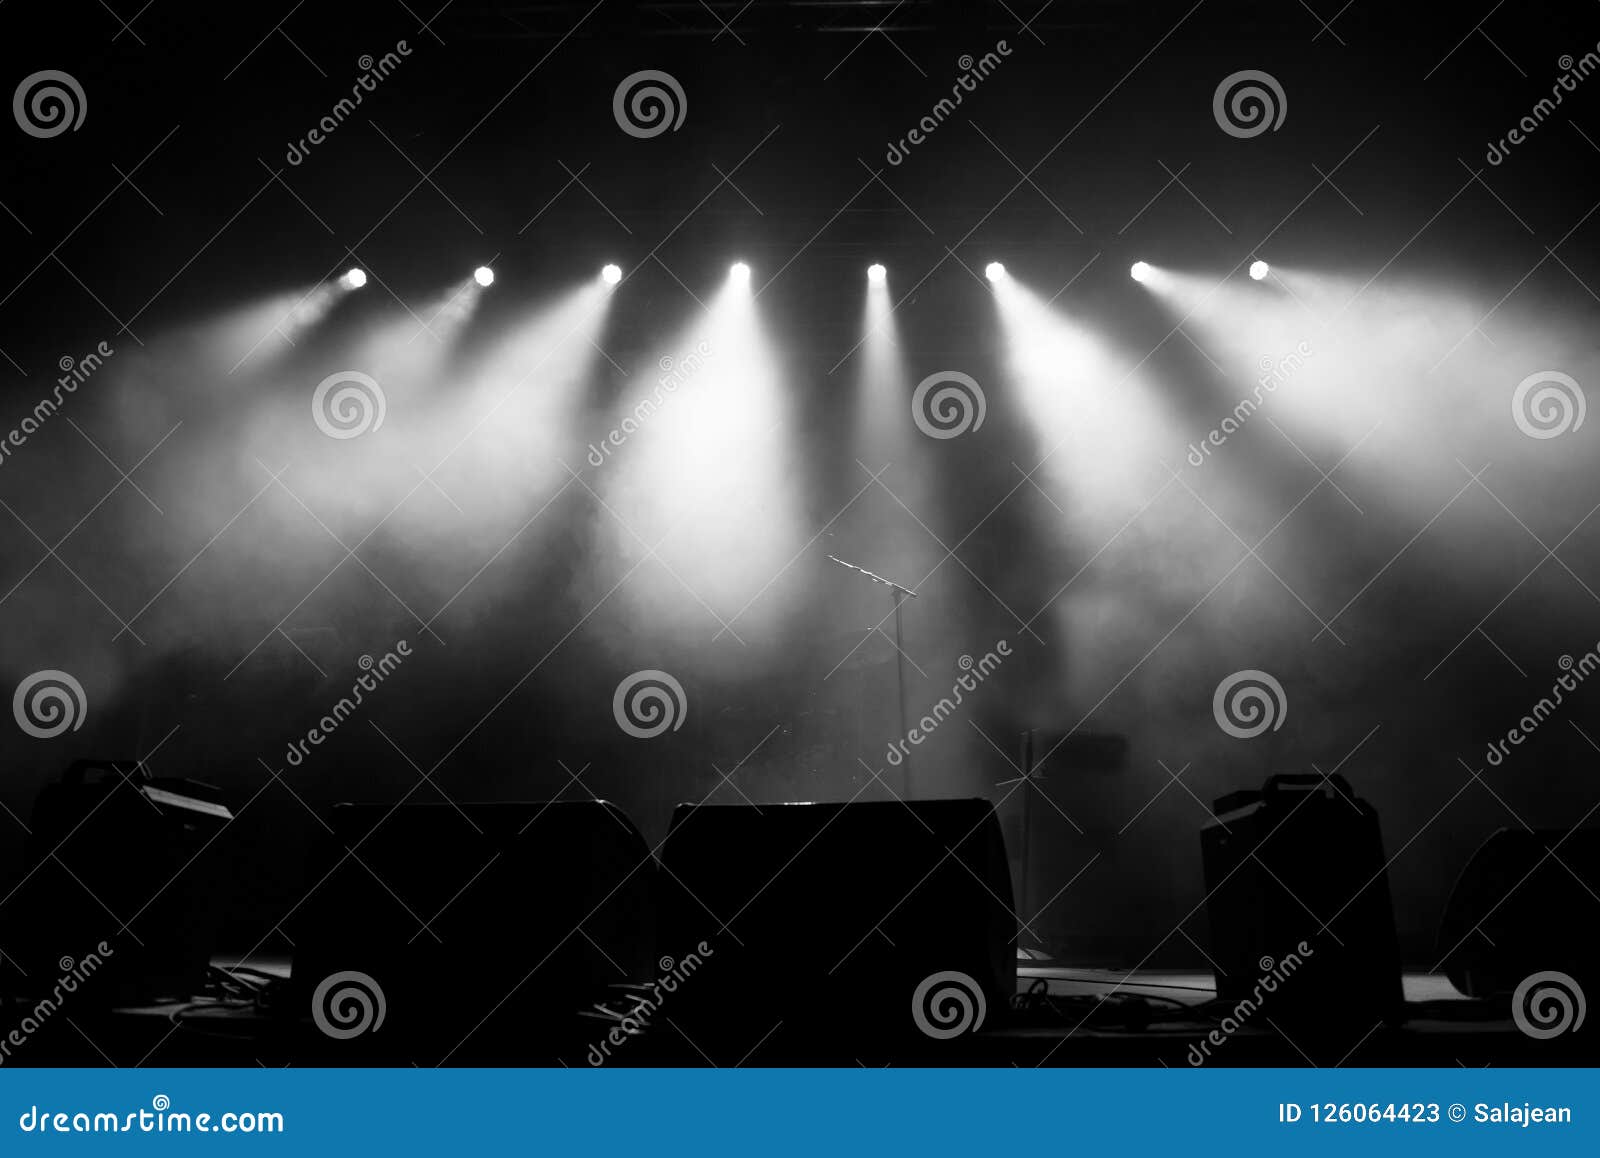 Wedding stage Black and White Stock Photos & Images - Alamy